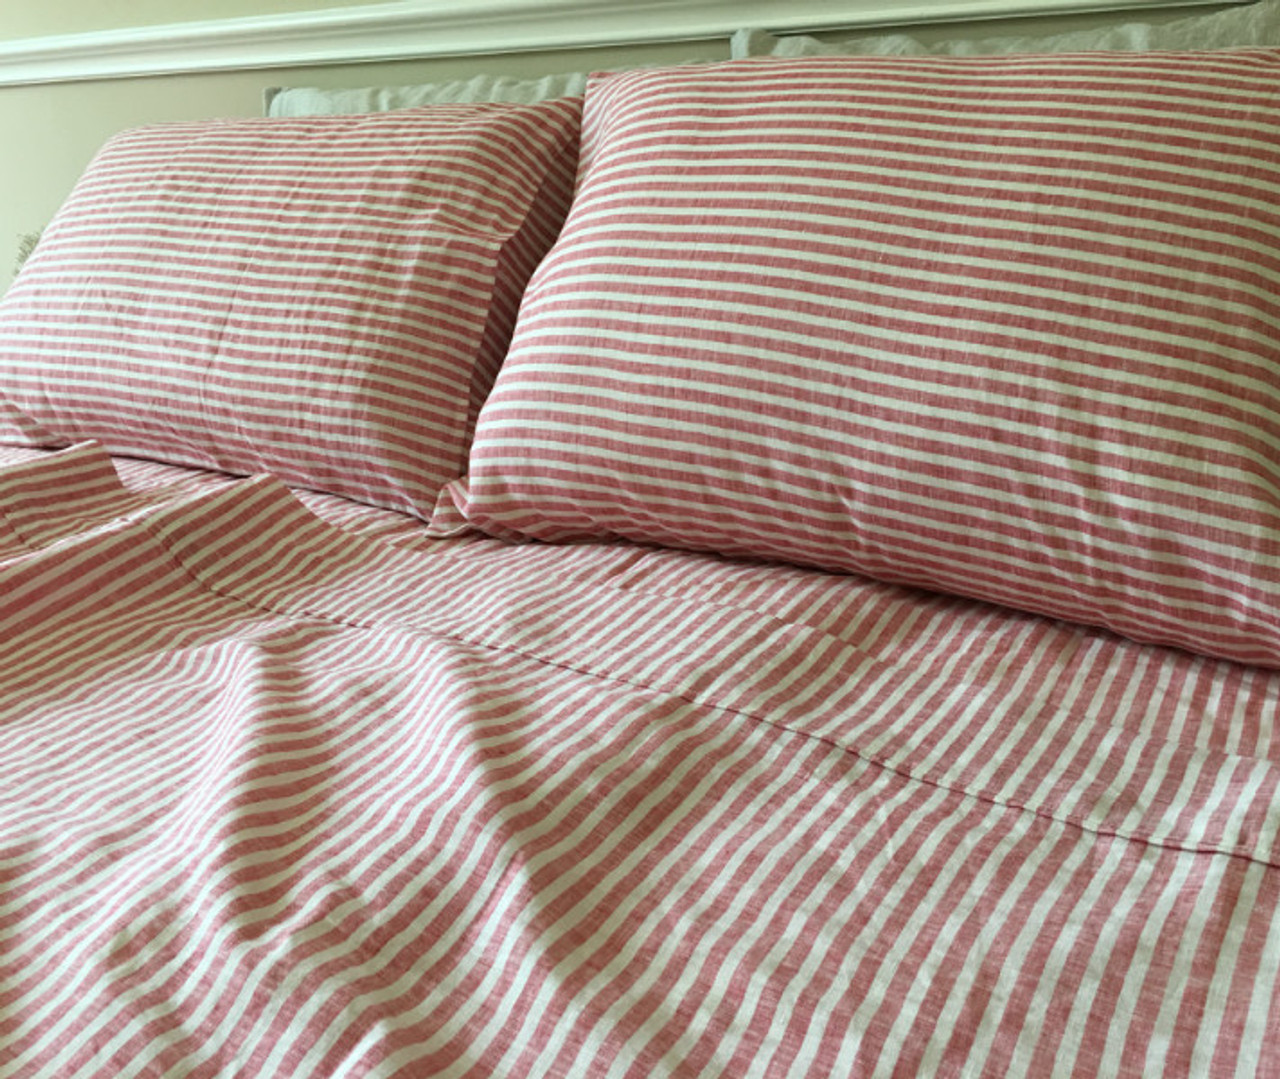 Red Ticking Stripe Sheets Set, 100 Linen Handcrafted by Superior Custom Linens